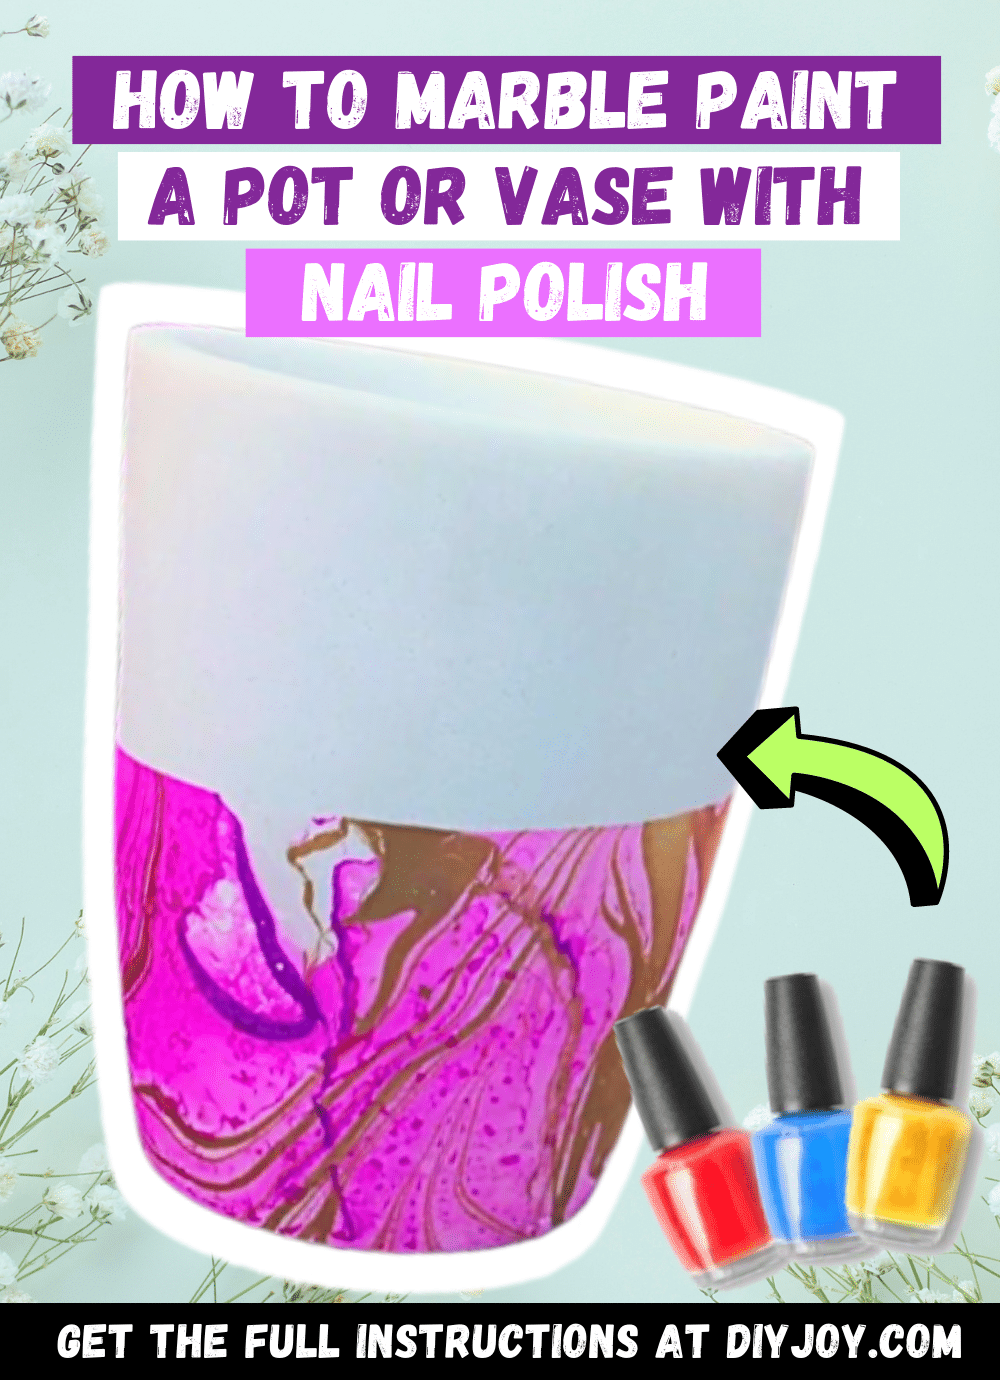 How to Marble Paint a Pot or Vase with Nail Polish